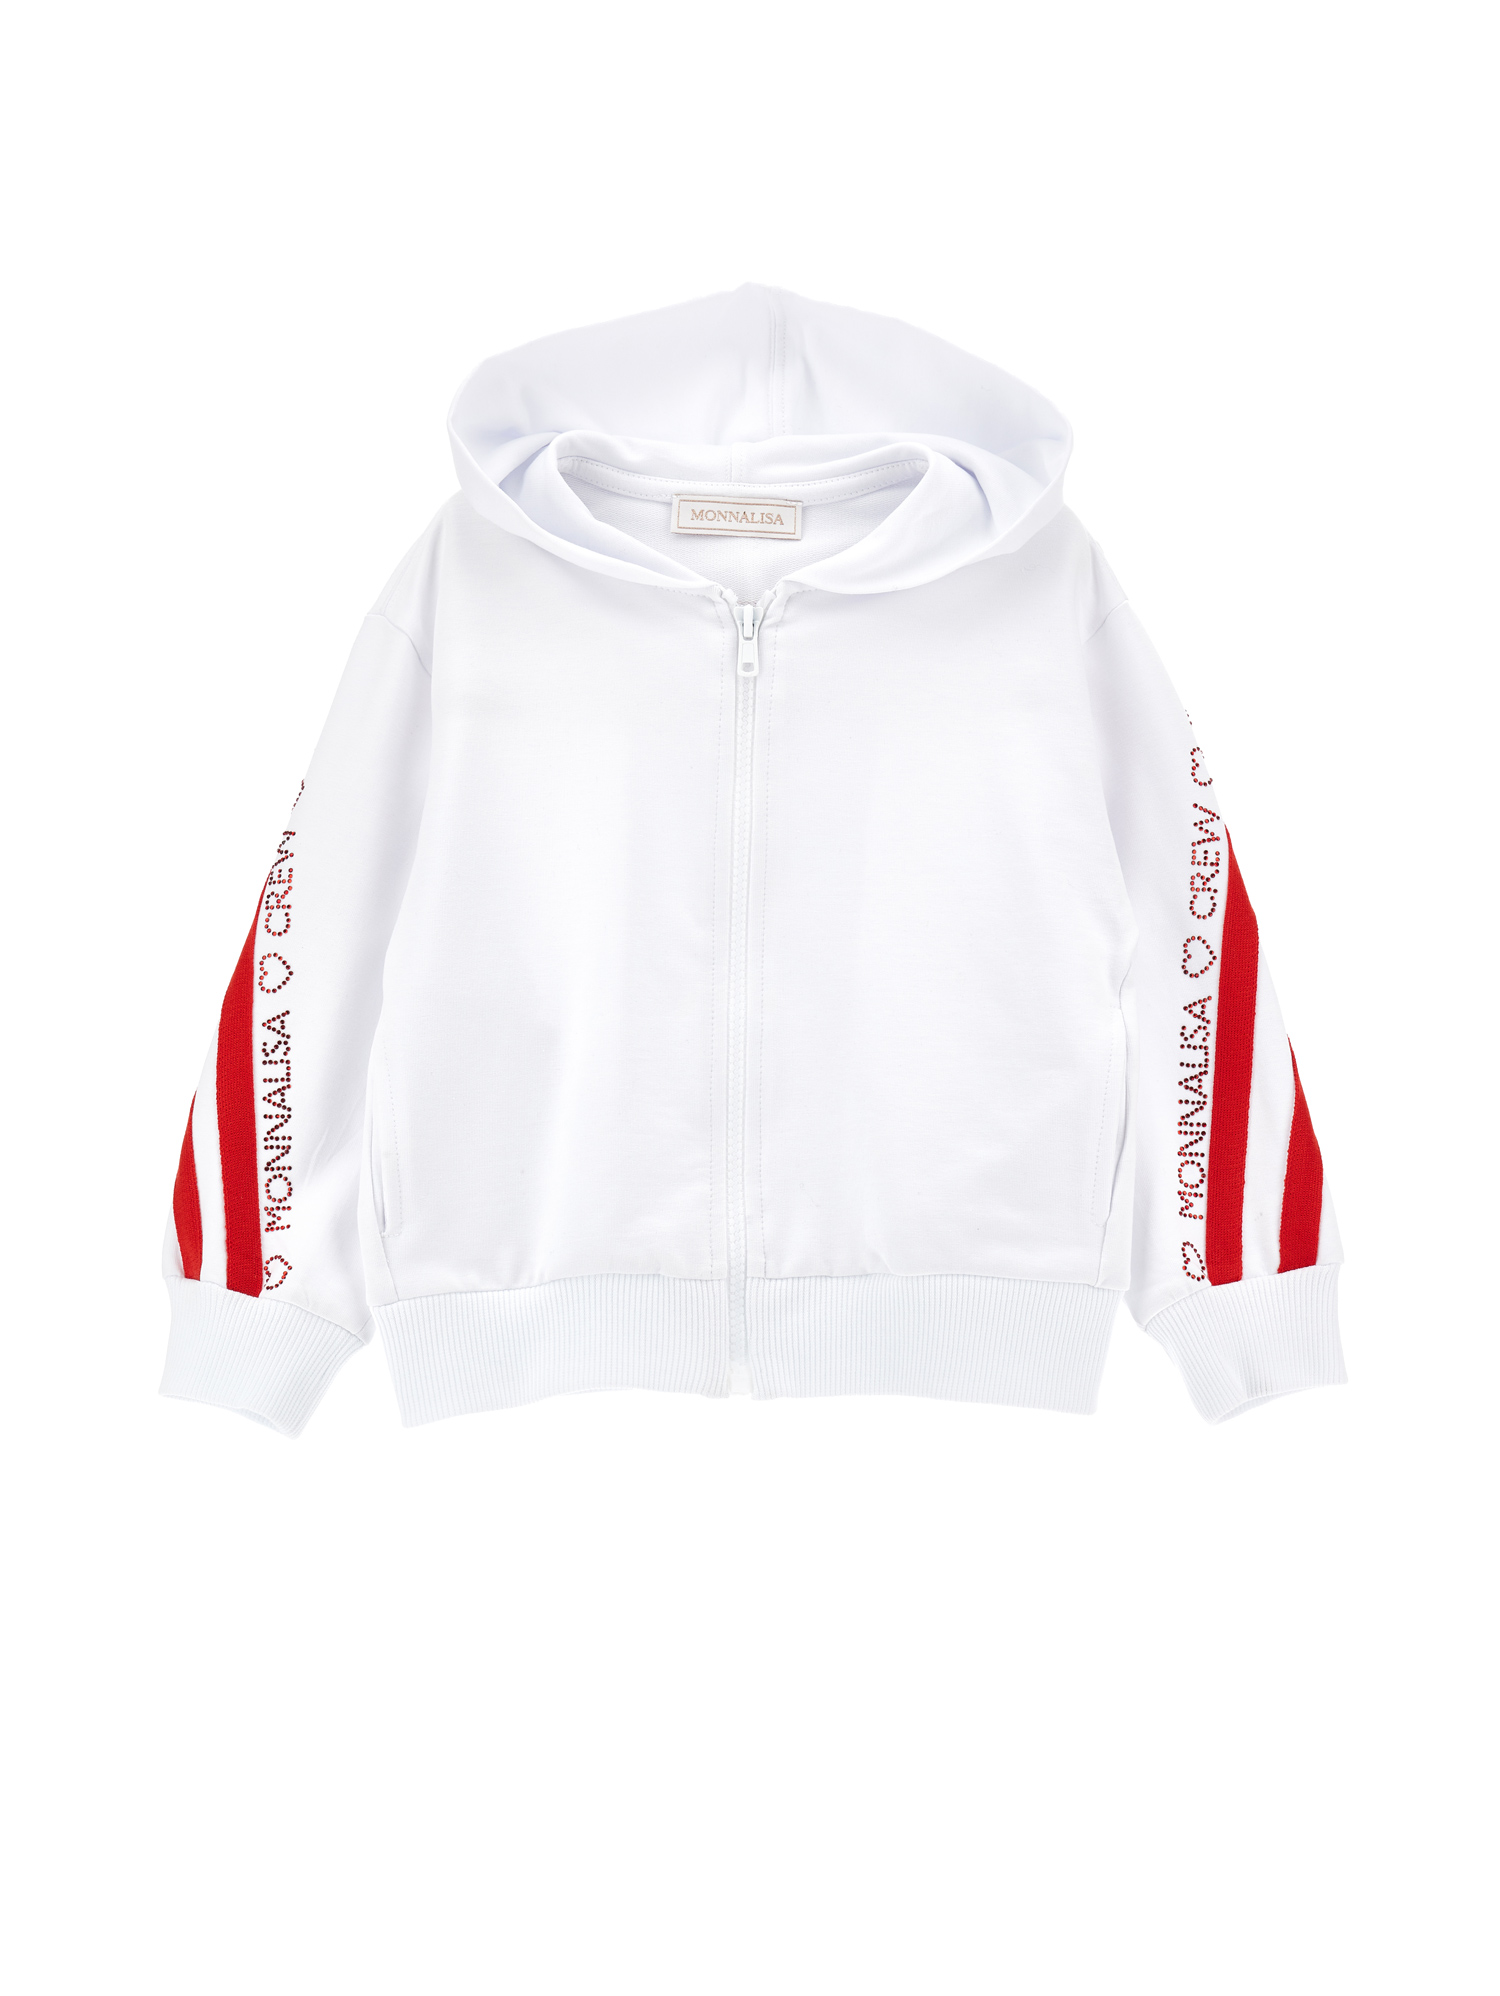 Monnalisa Kids'   Open Sweatshirt With Blouse Sleeves In White + Red